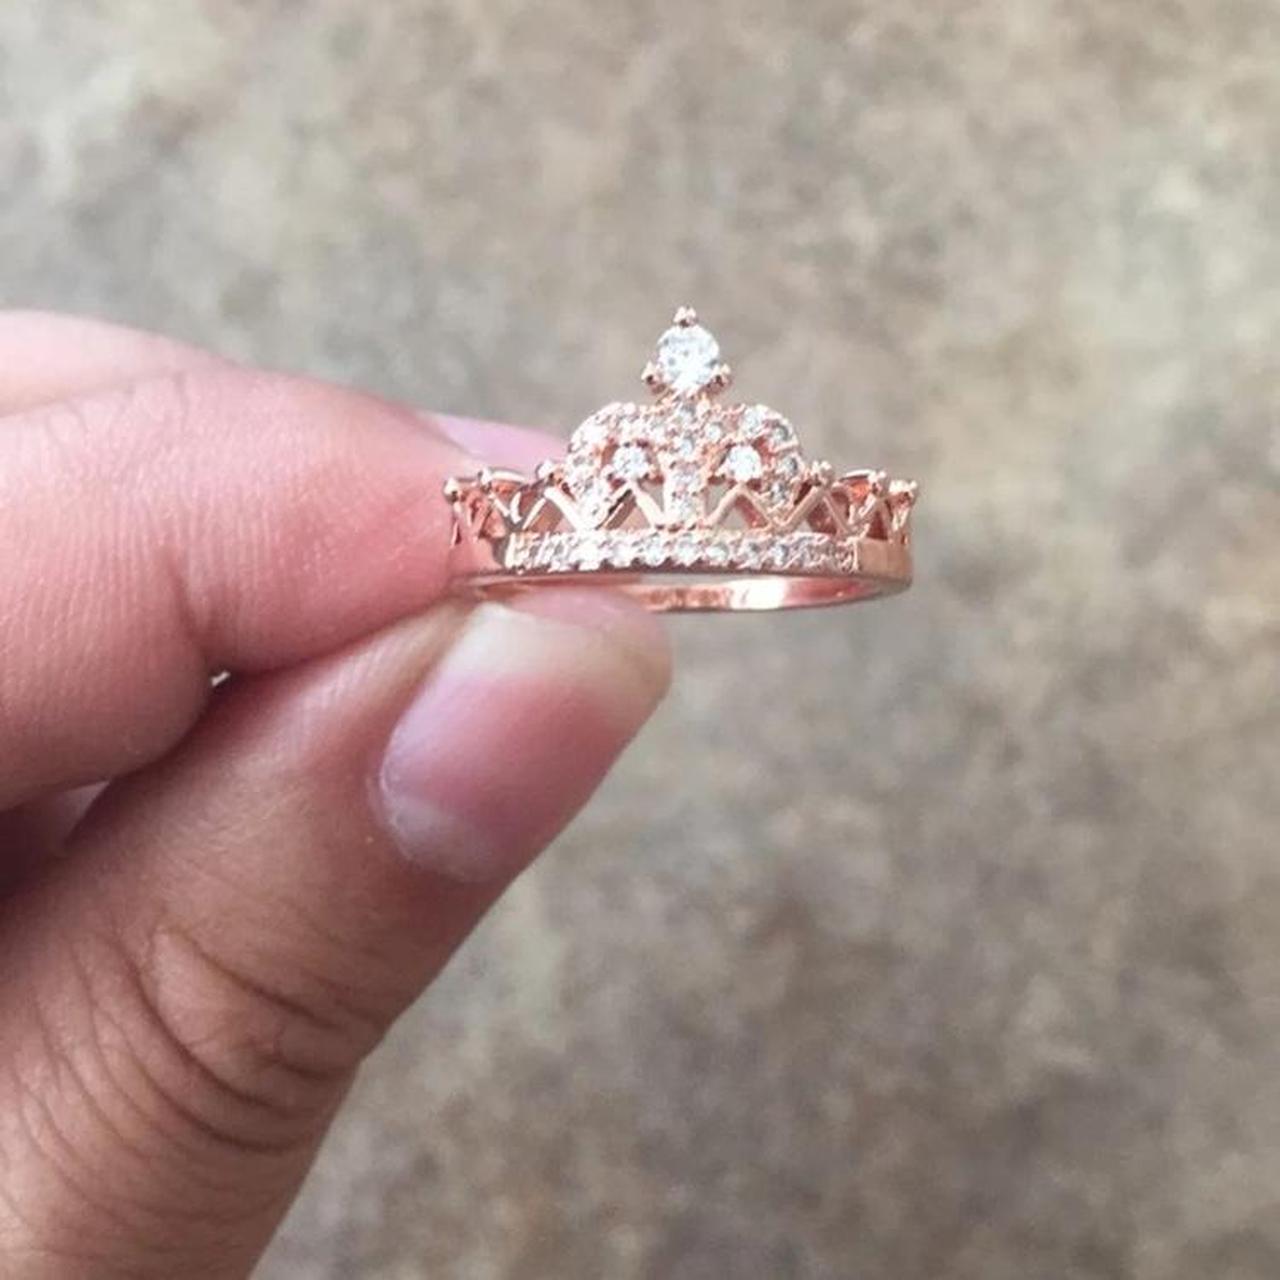 Product Image 2 - Rose gold princess crown ring
Condition: